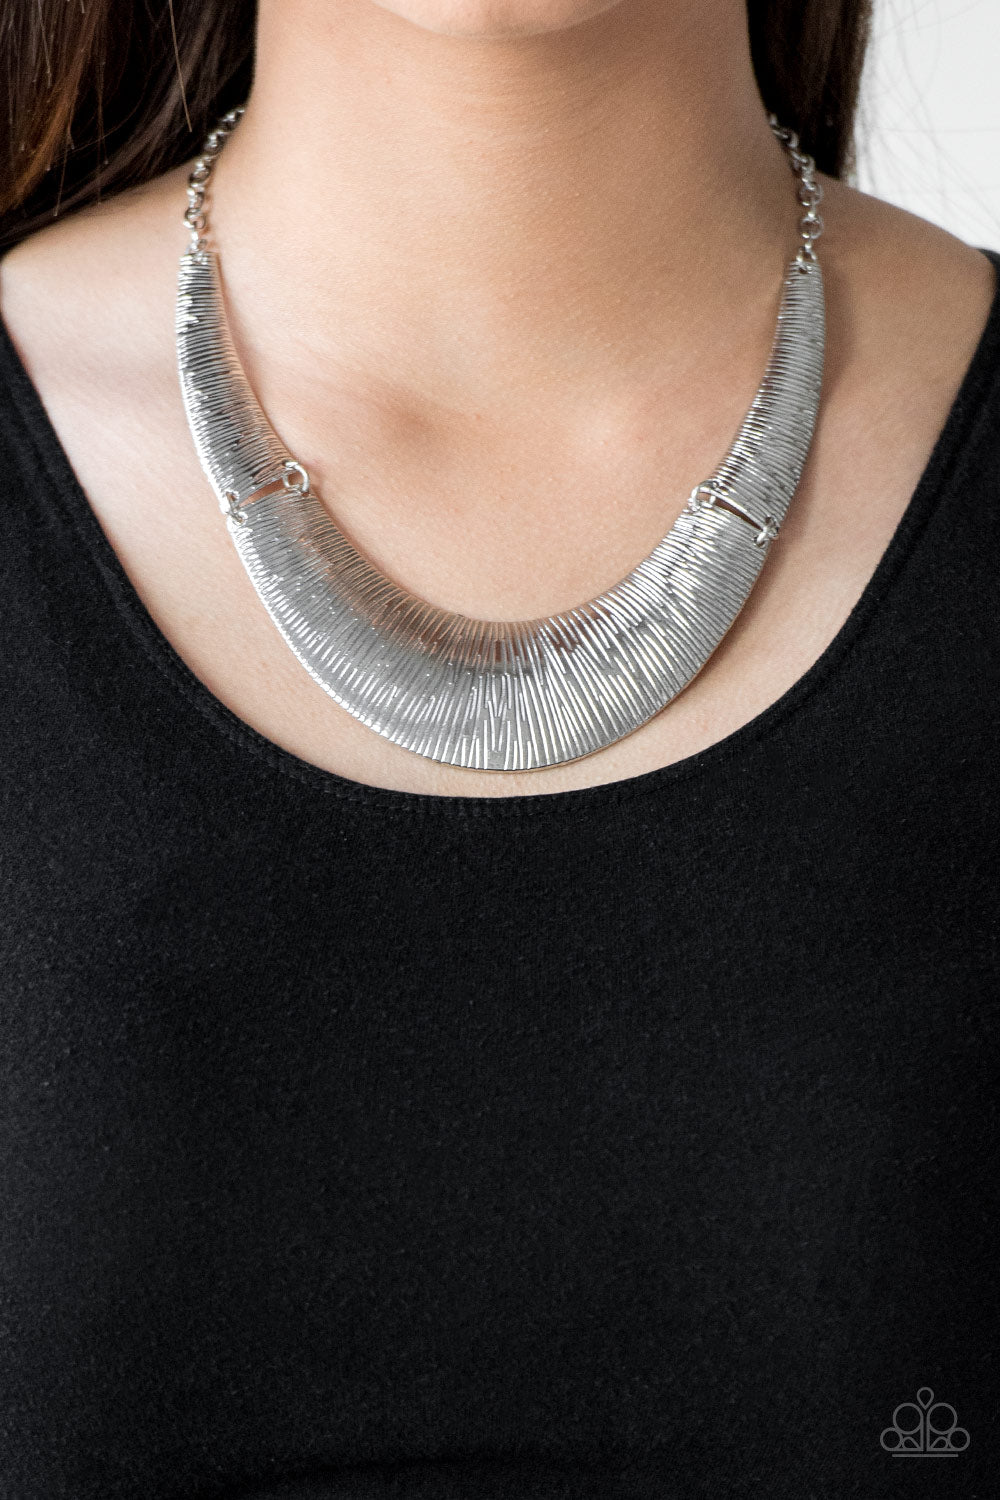 Feast or Famine- Silver Necklace- Paparazzi Accessories